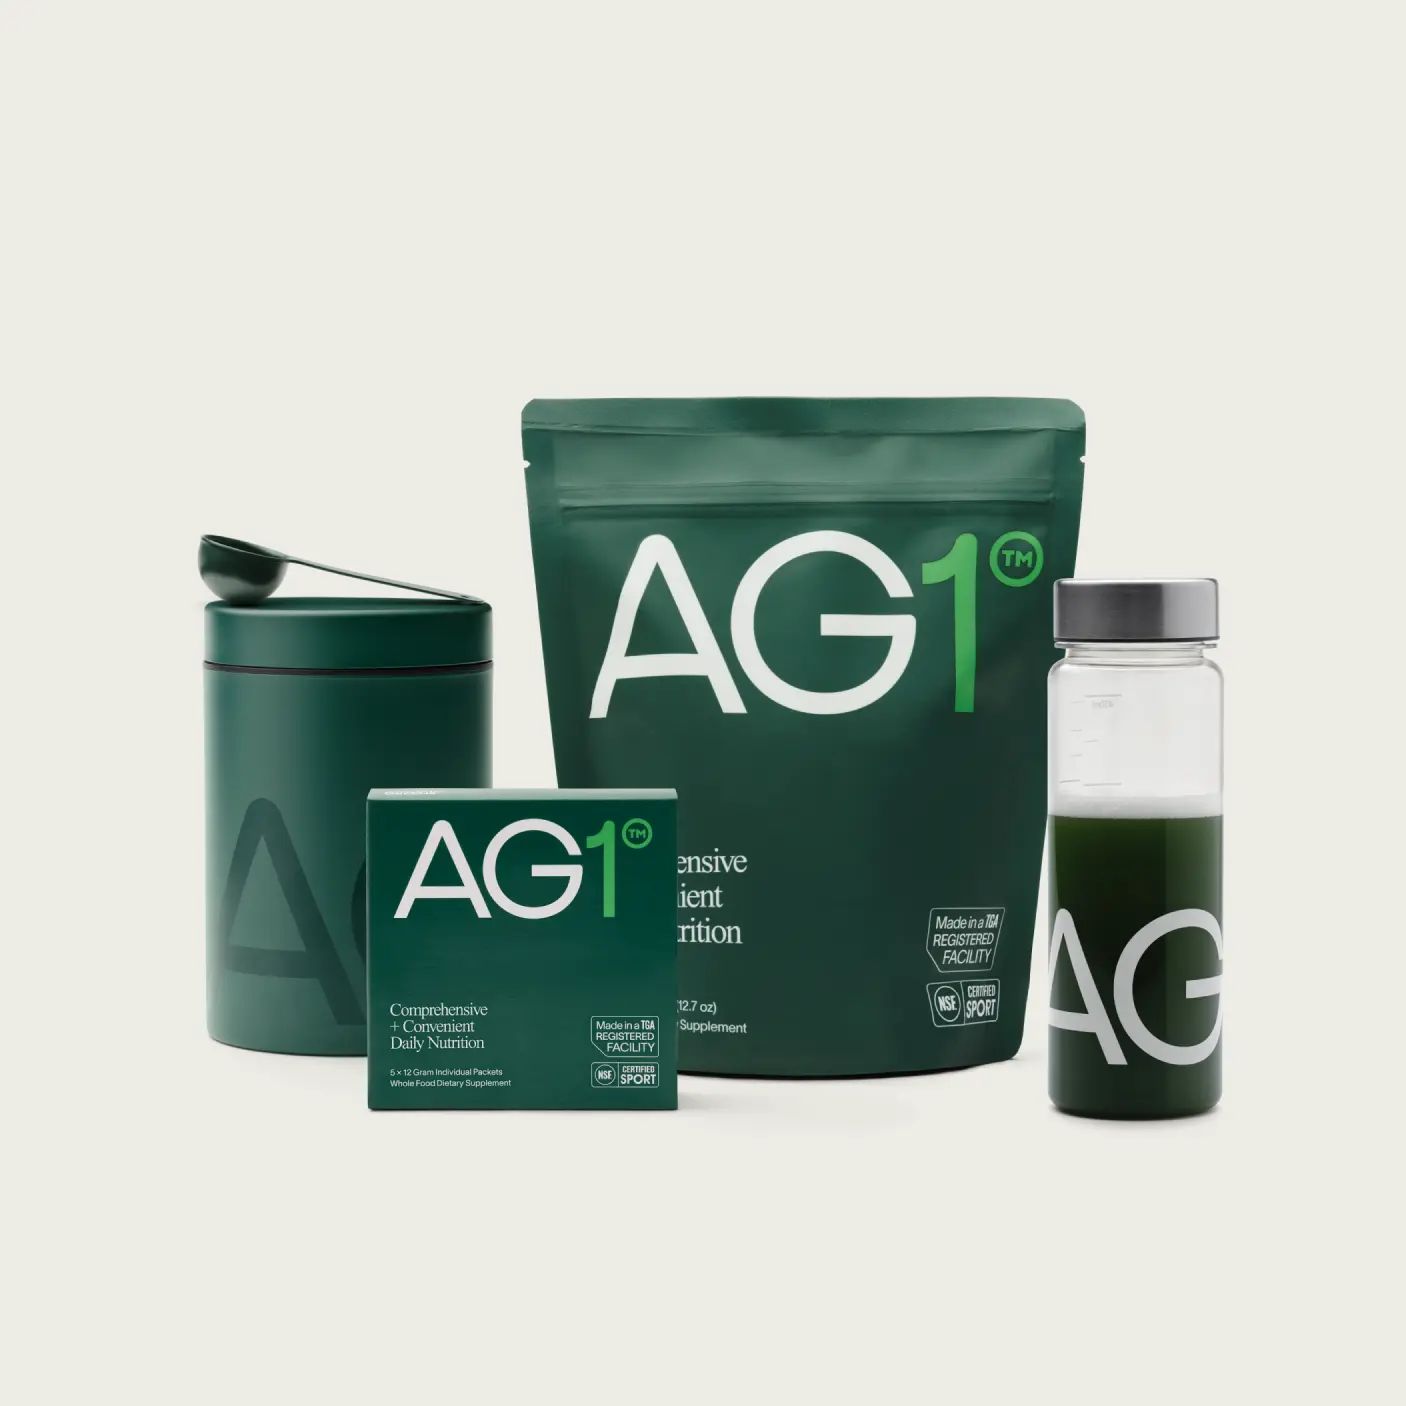 Free Welcome Kit: Premium Canister, Scoop, Shaker & 5 Free Travel Packs** | AG1